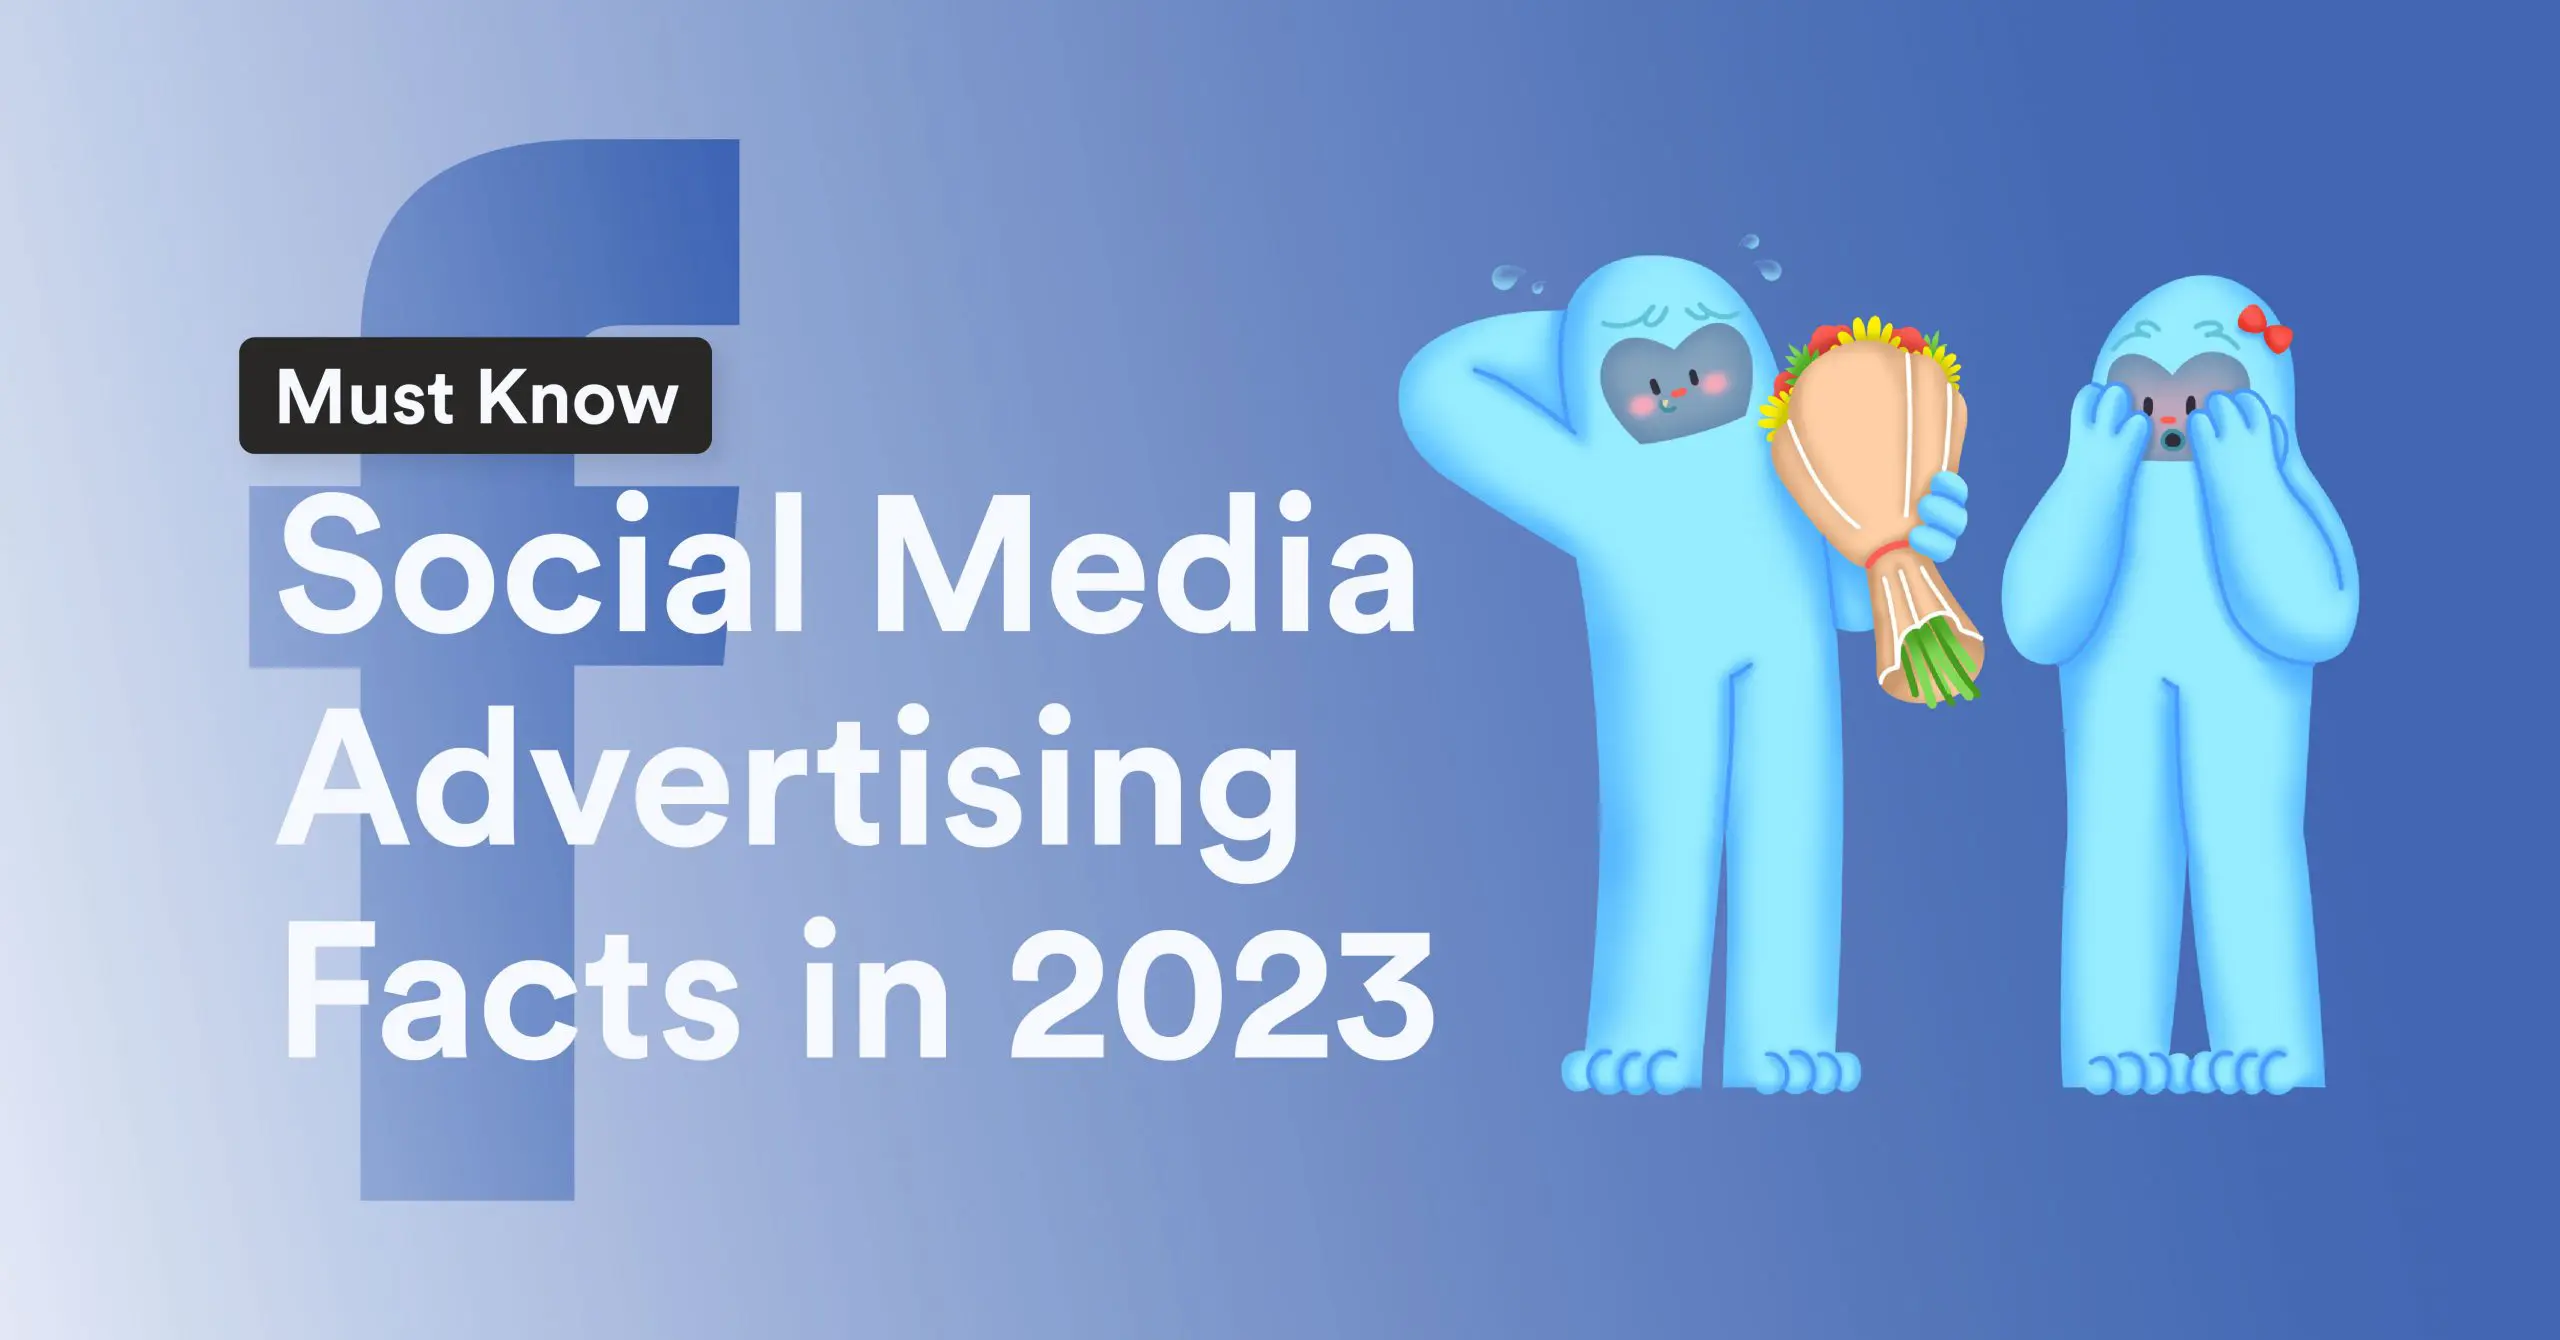 [Facebook] Must Know Social Media Advertising Facts in 2023